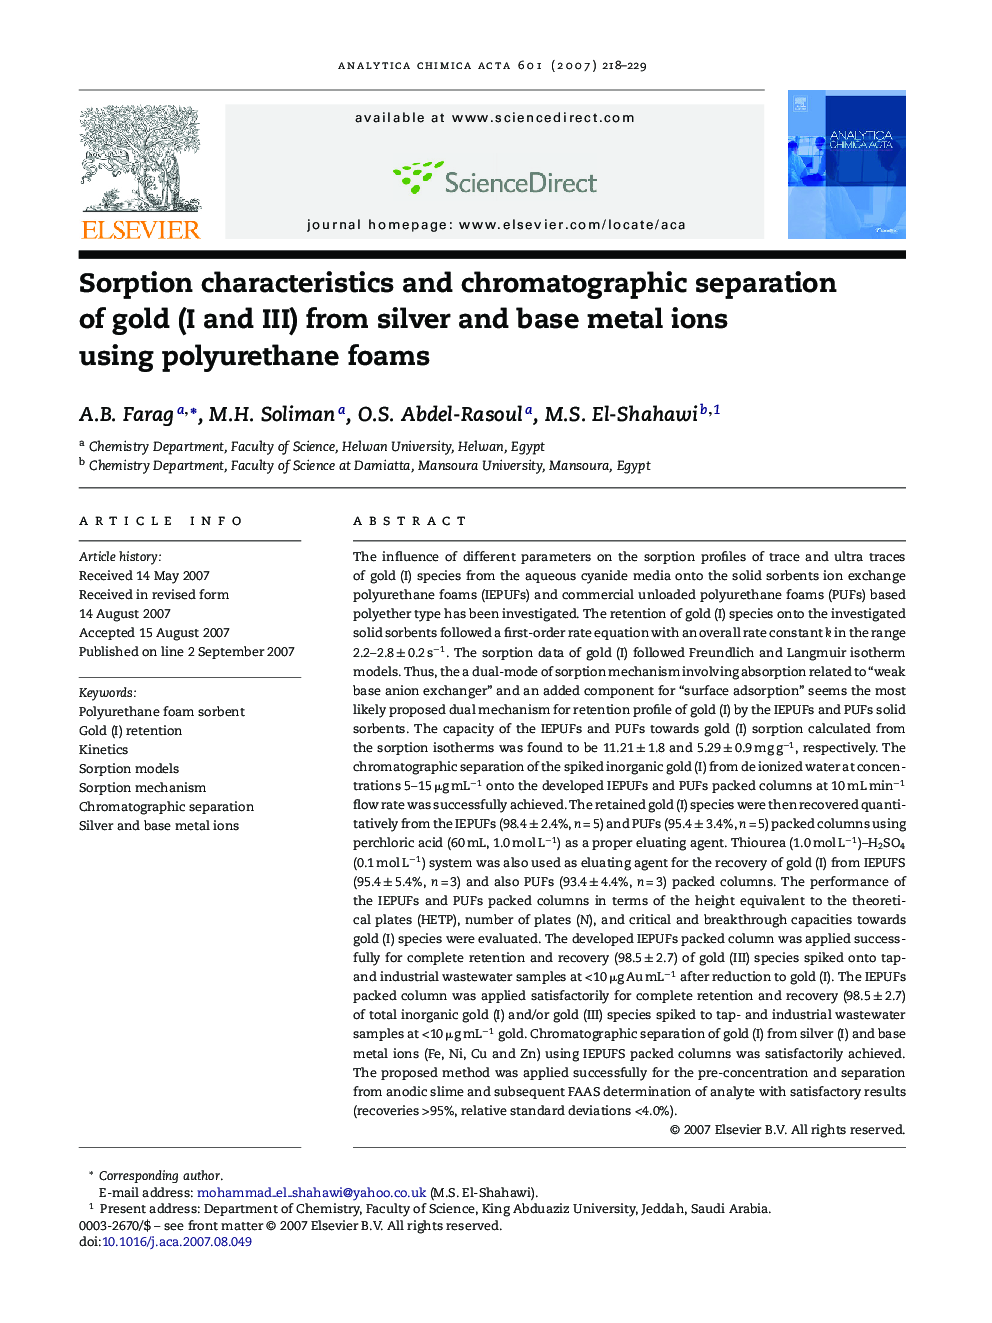 Sorption characteristics and chromatographic separation of gold (I and III) from silver and base metal ions using polyurethane foams